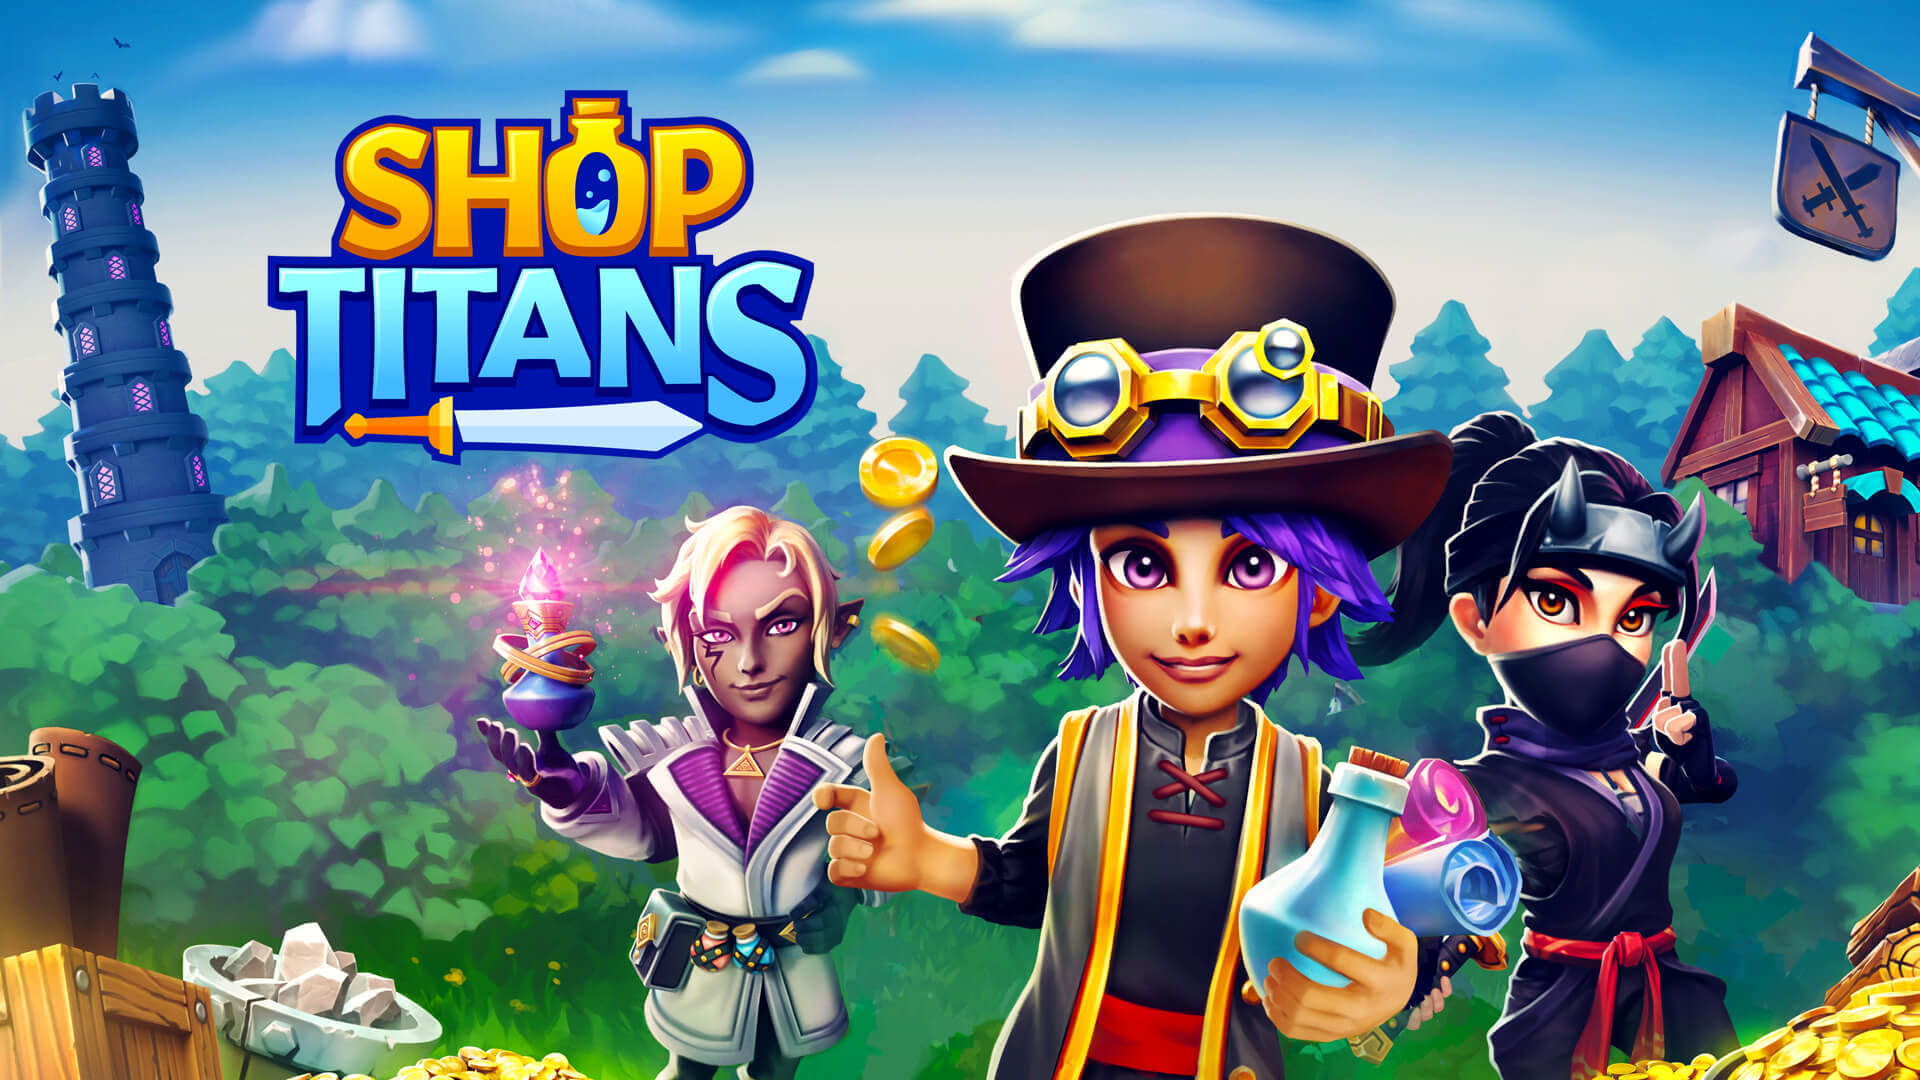 Shop Titans: RPG Idle Tycoon - Apps on Google Play